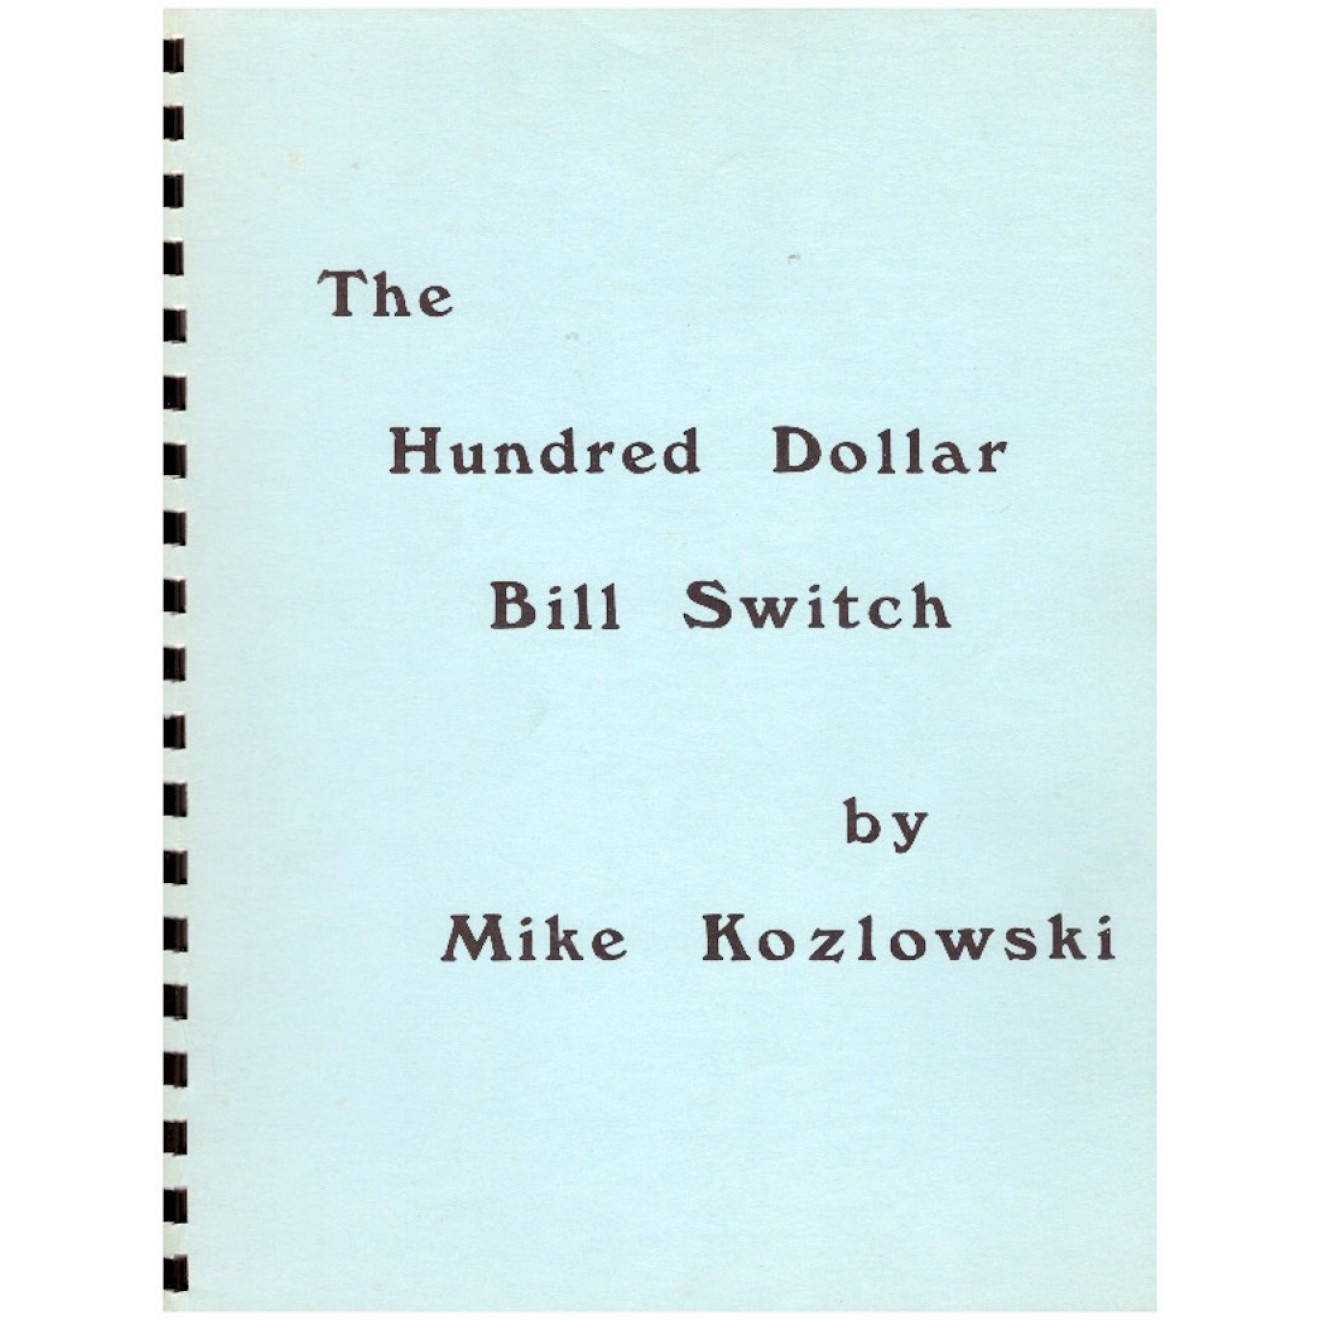 The Hundred Dollar Bill Switch